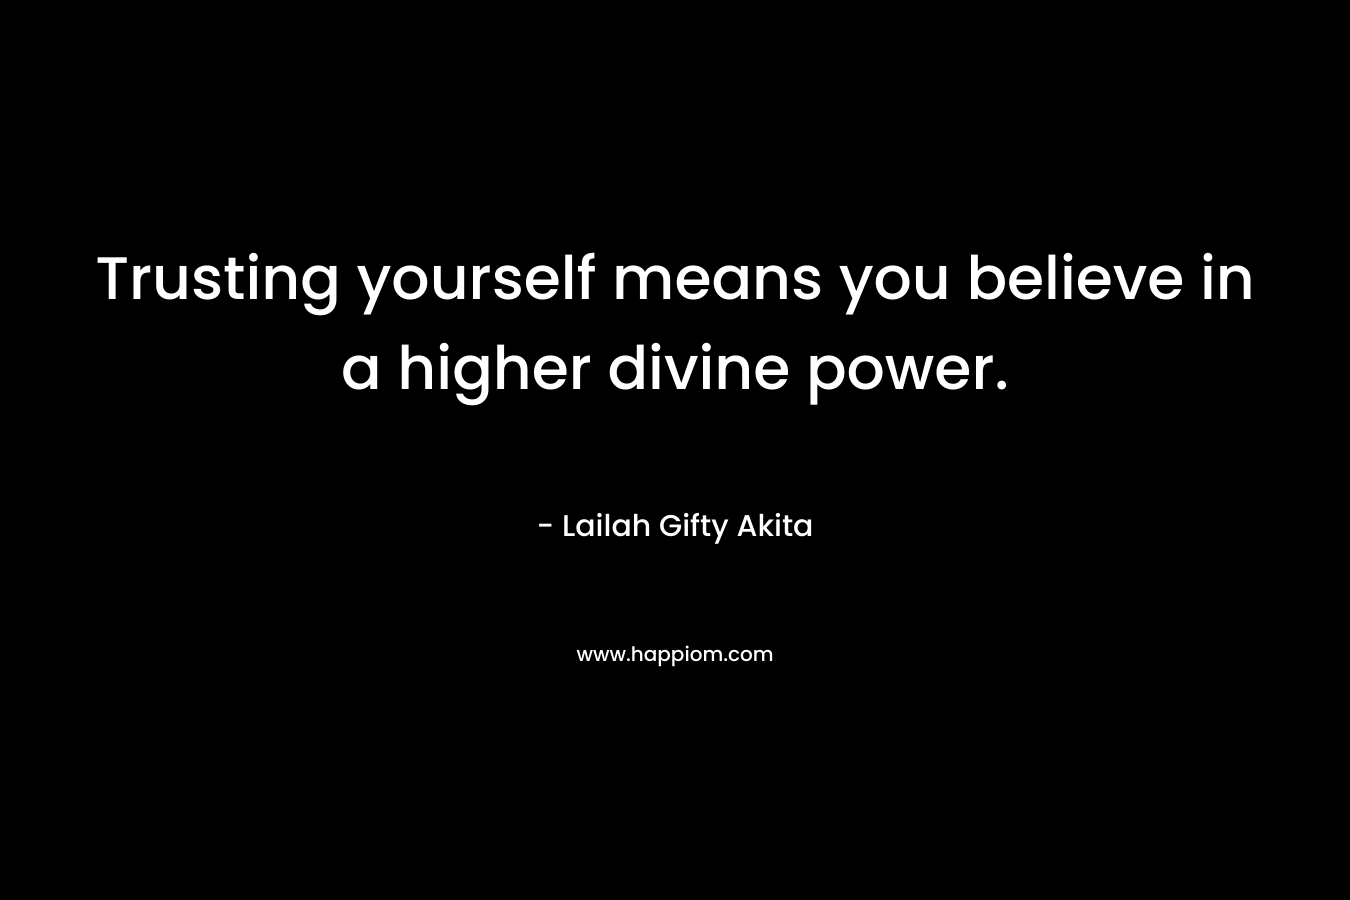 Trusting yourself means you believe in a higher divine power.